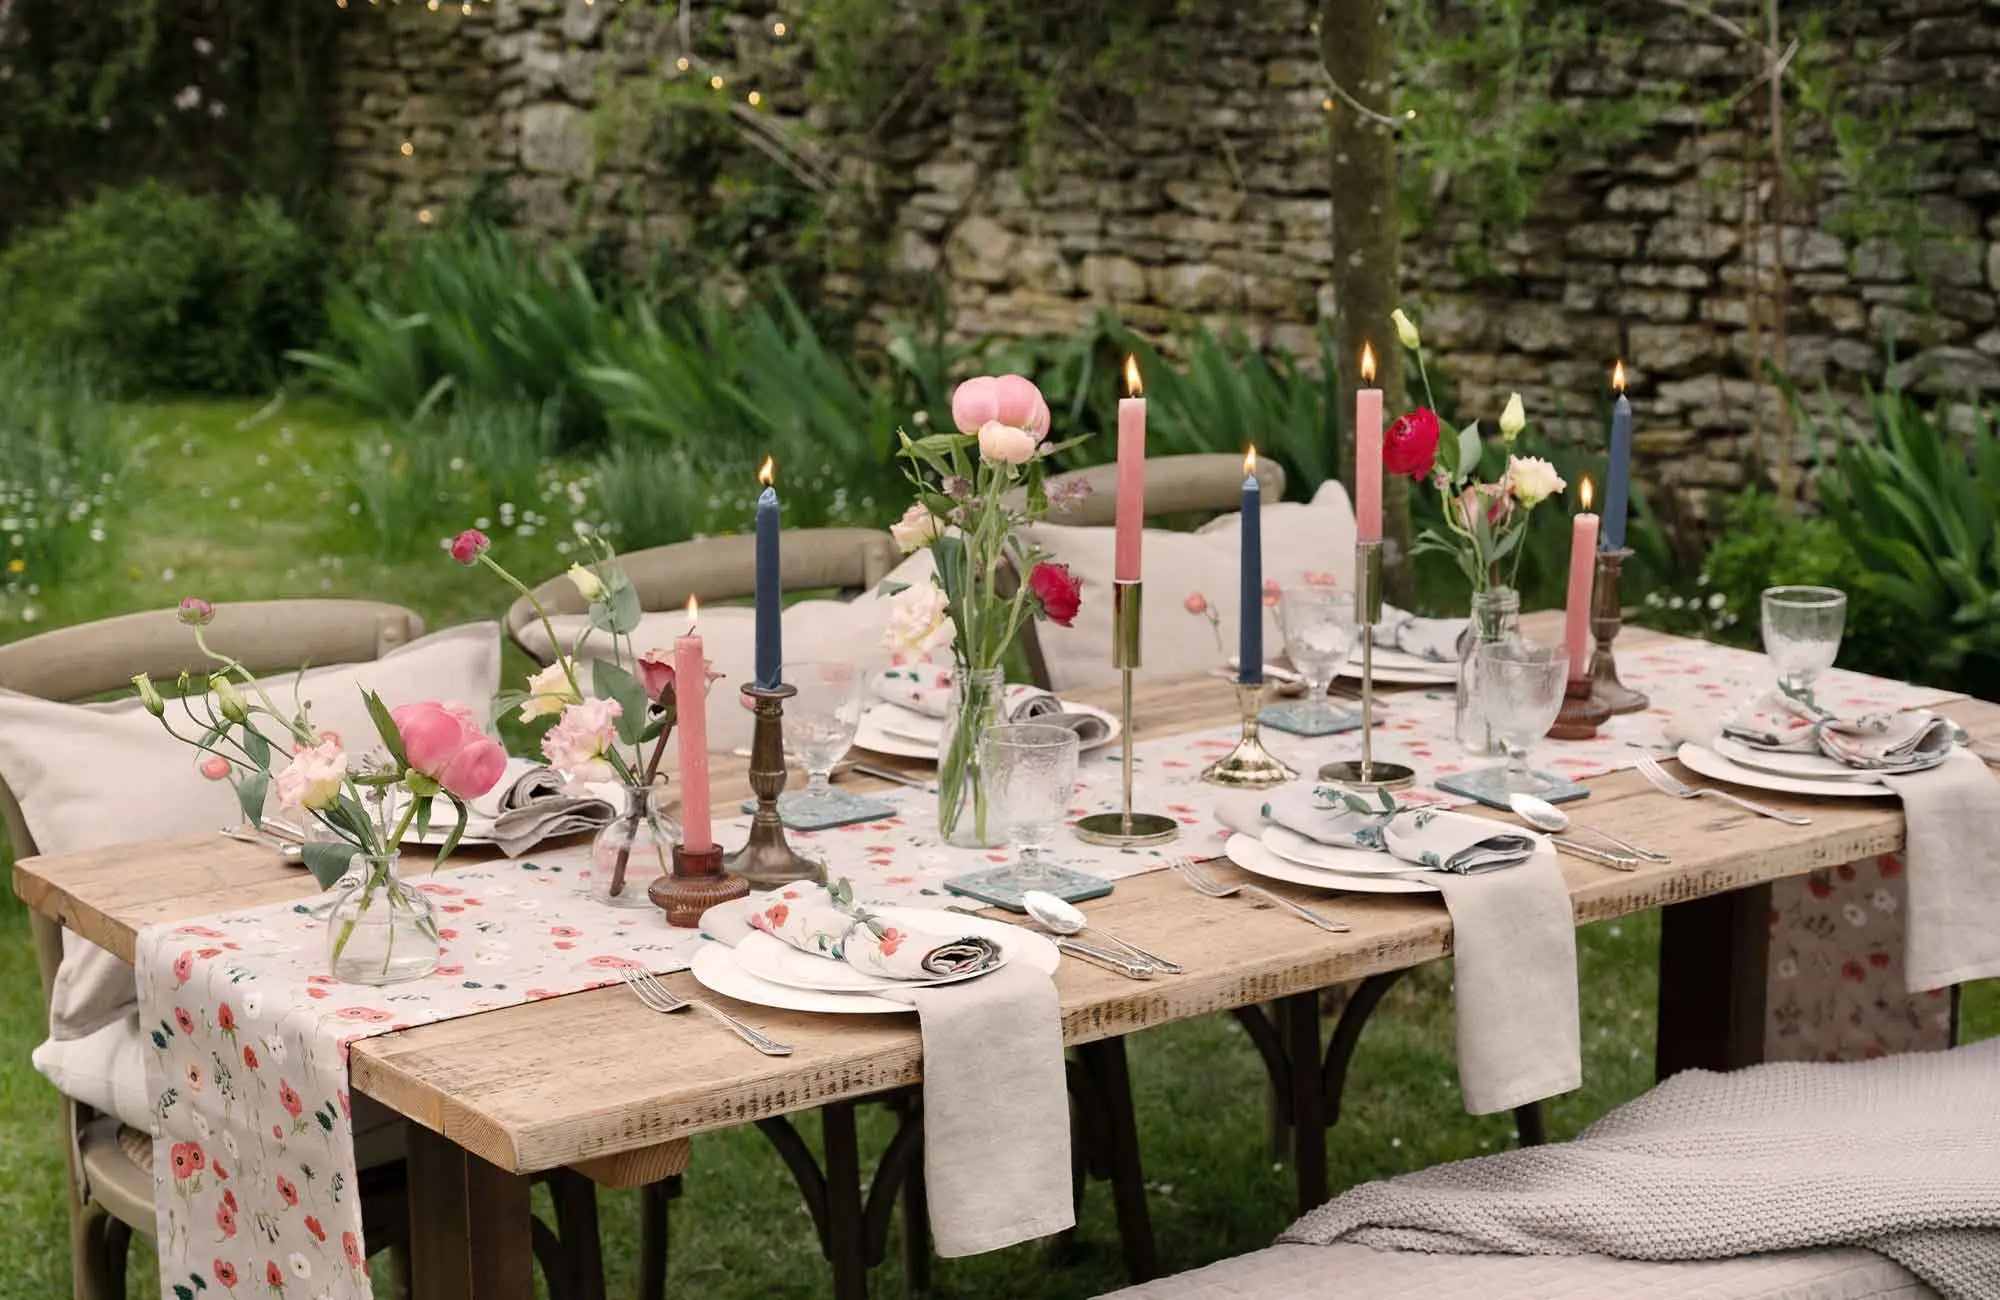 Create A Wildflower & Nature-Inspired Tablescape